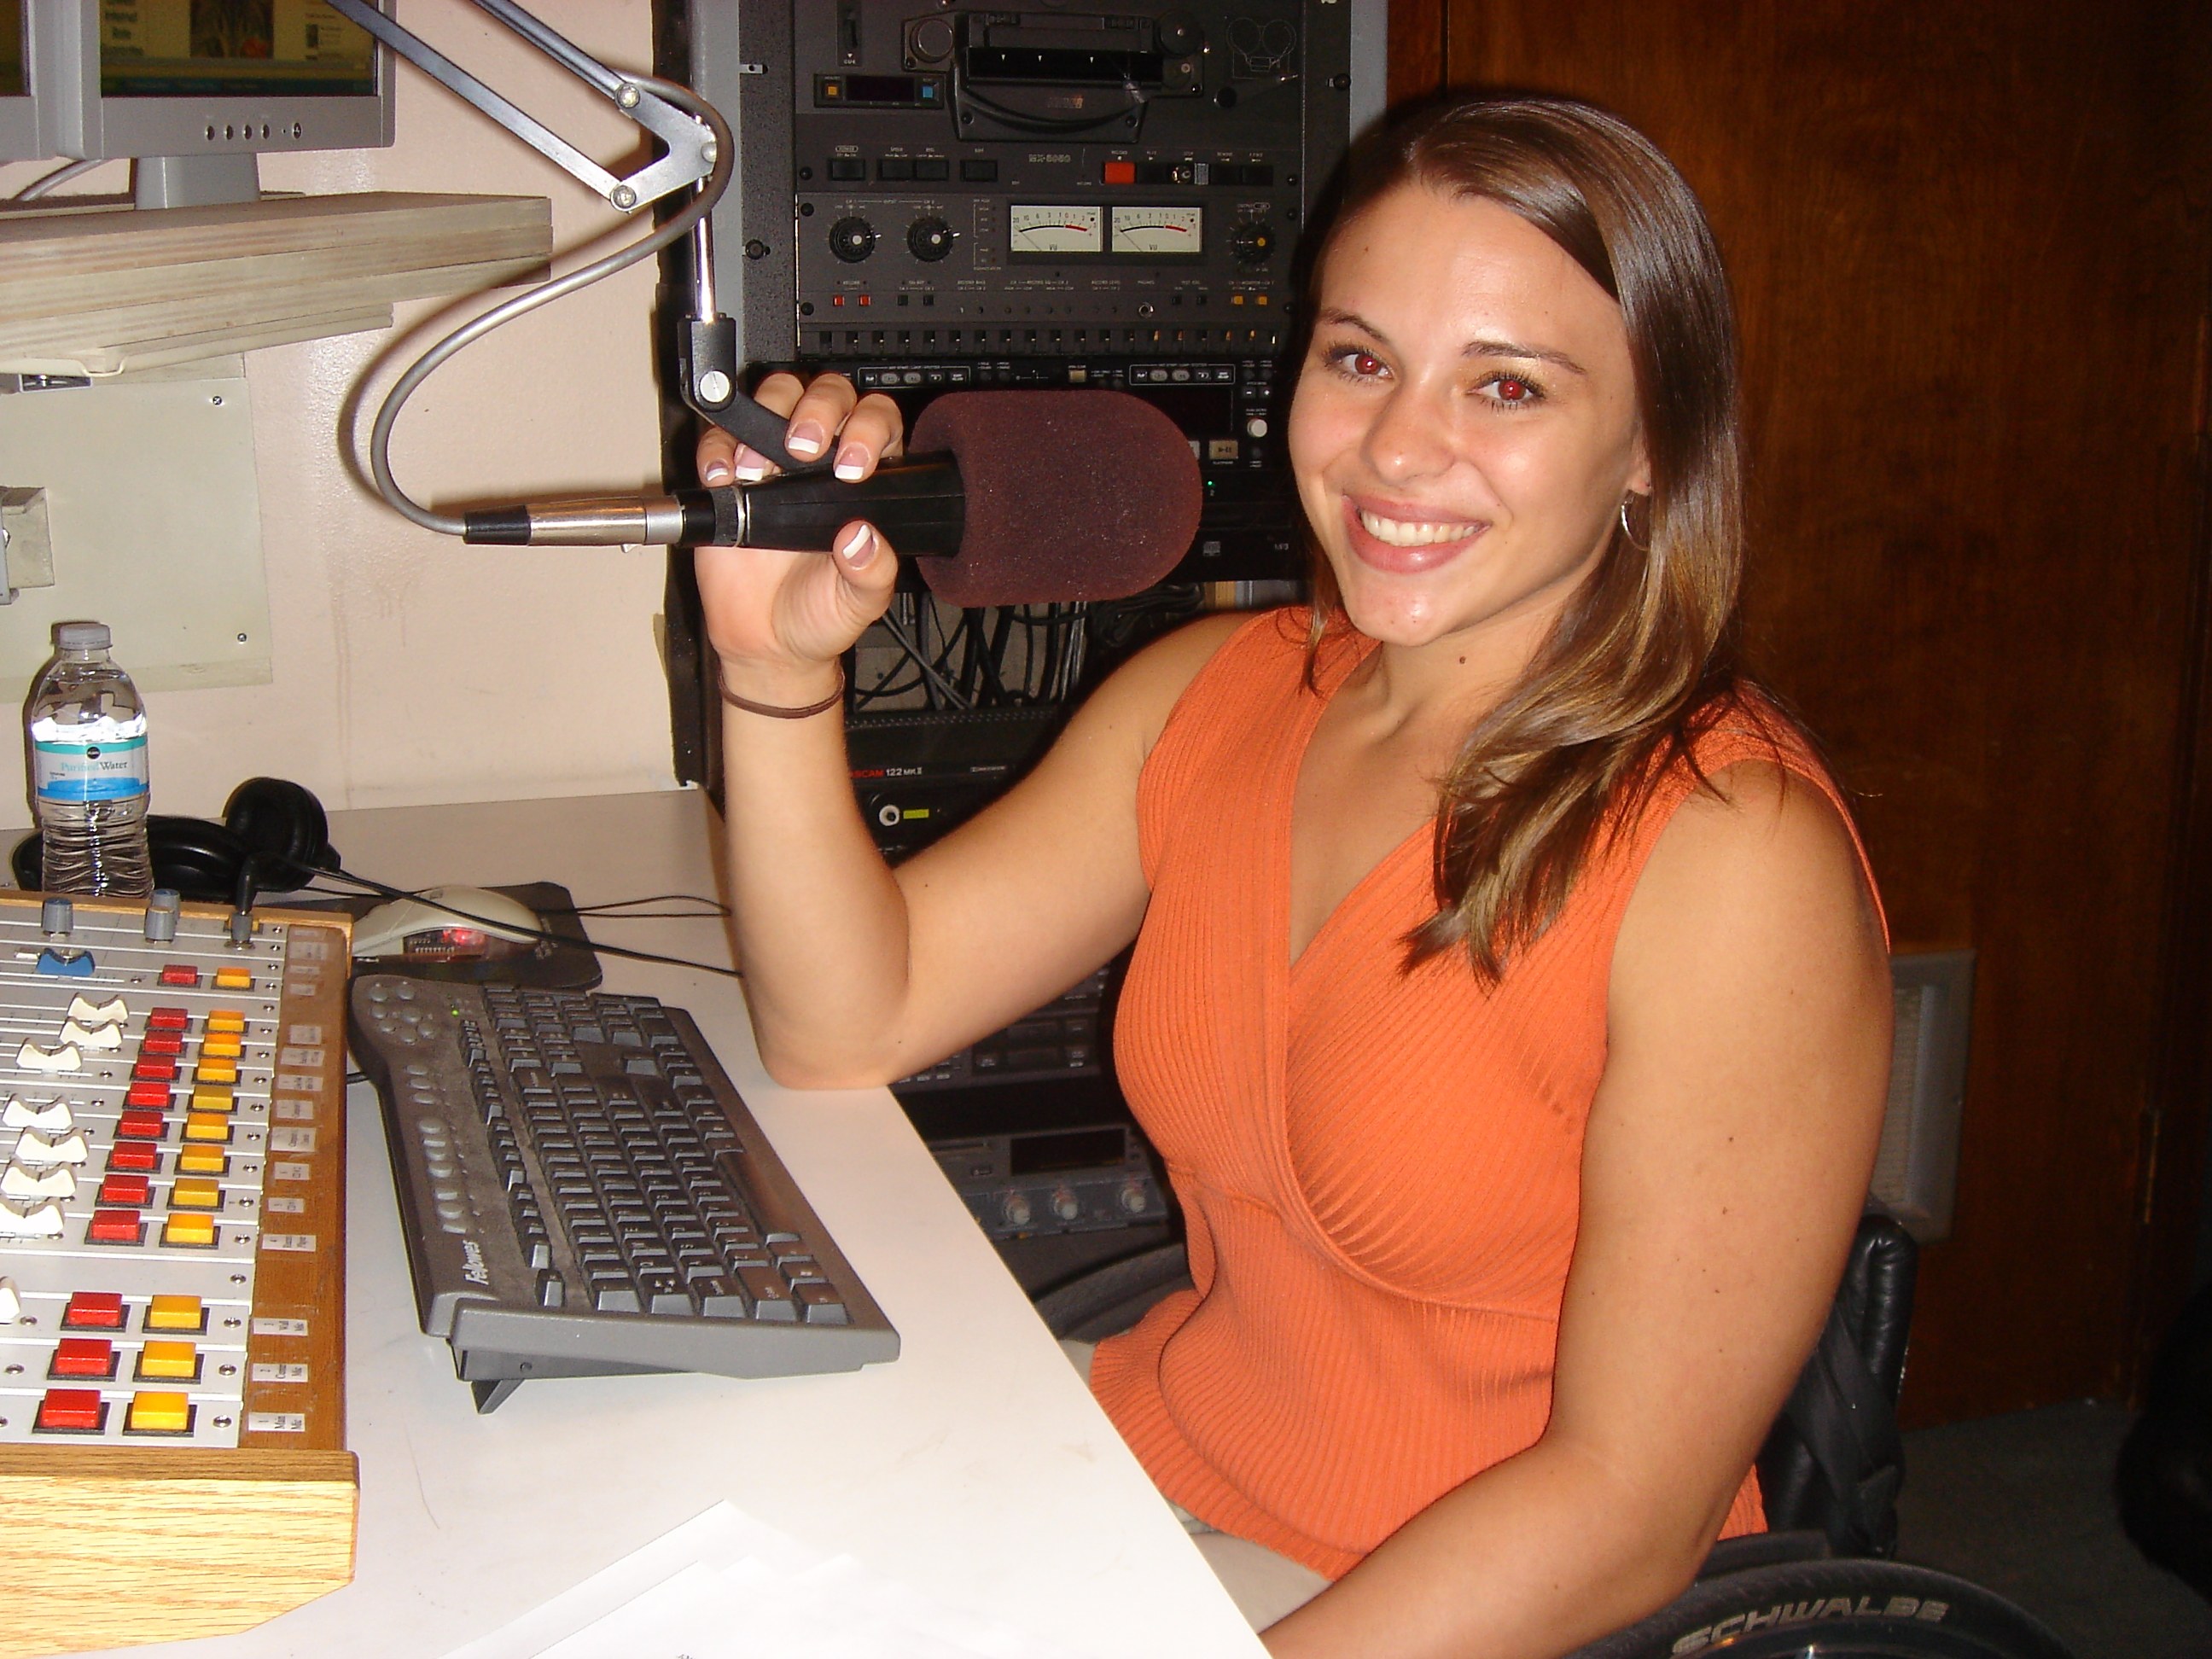 While managing the radio station, Kristina produced and hosted countless radio shows, facilitated live broadcasts and DJ’d dances, parties and weddings across Northeast Georgia.